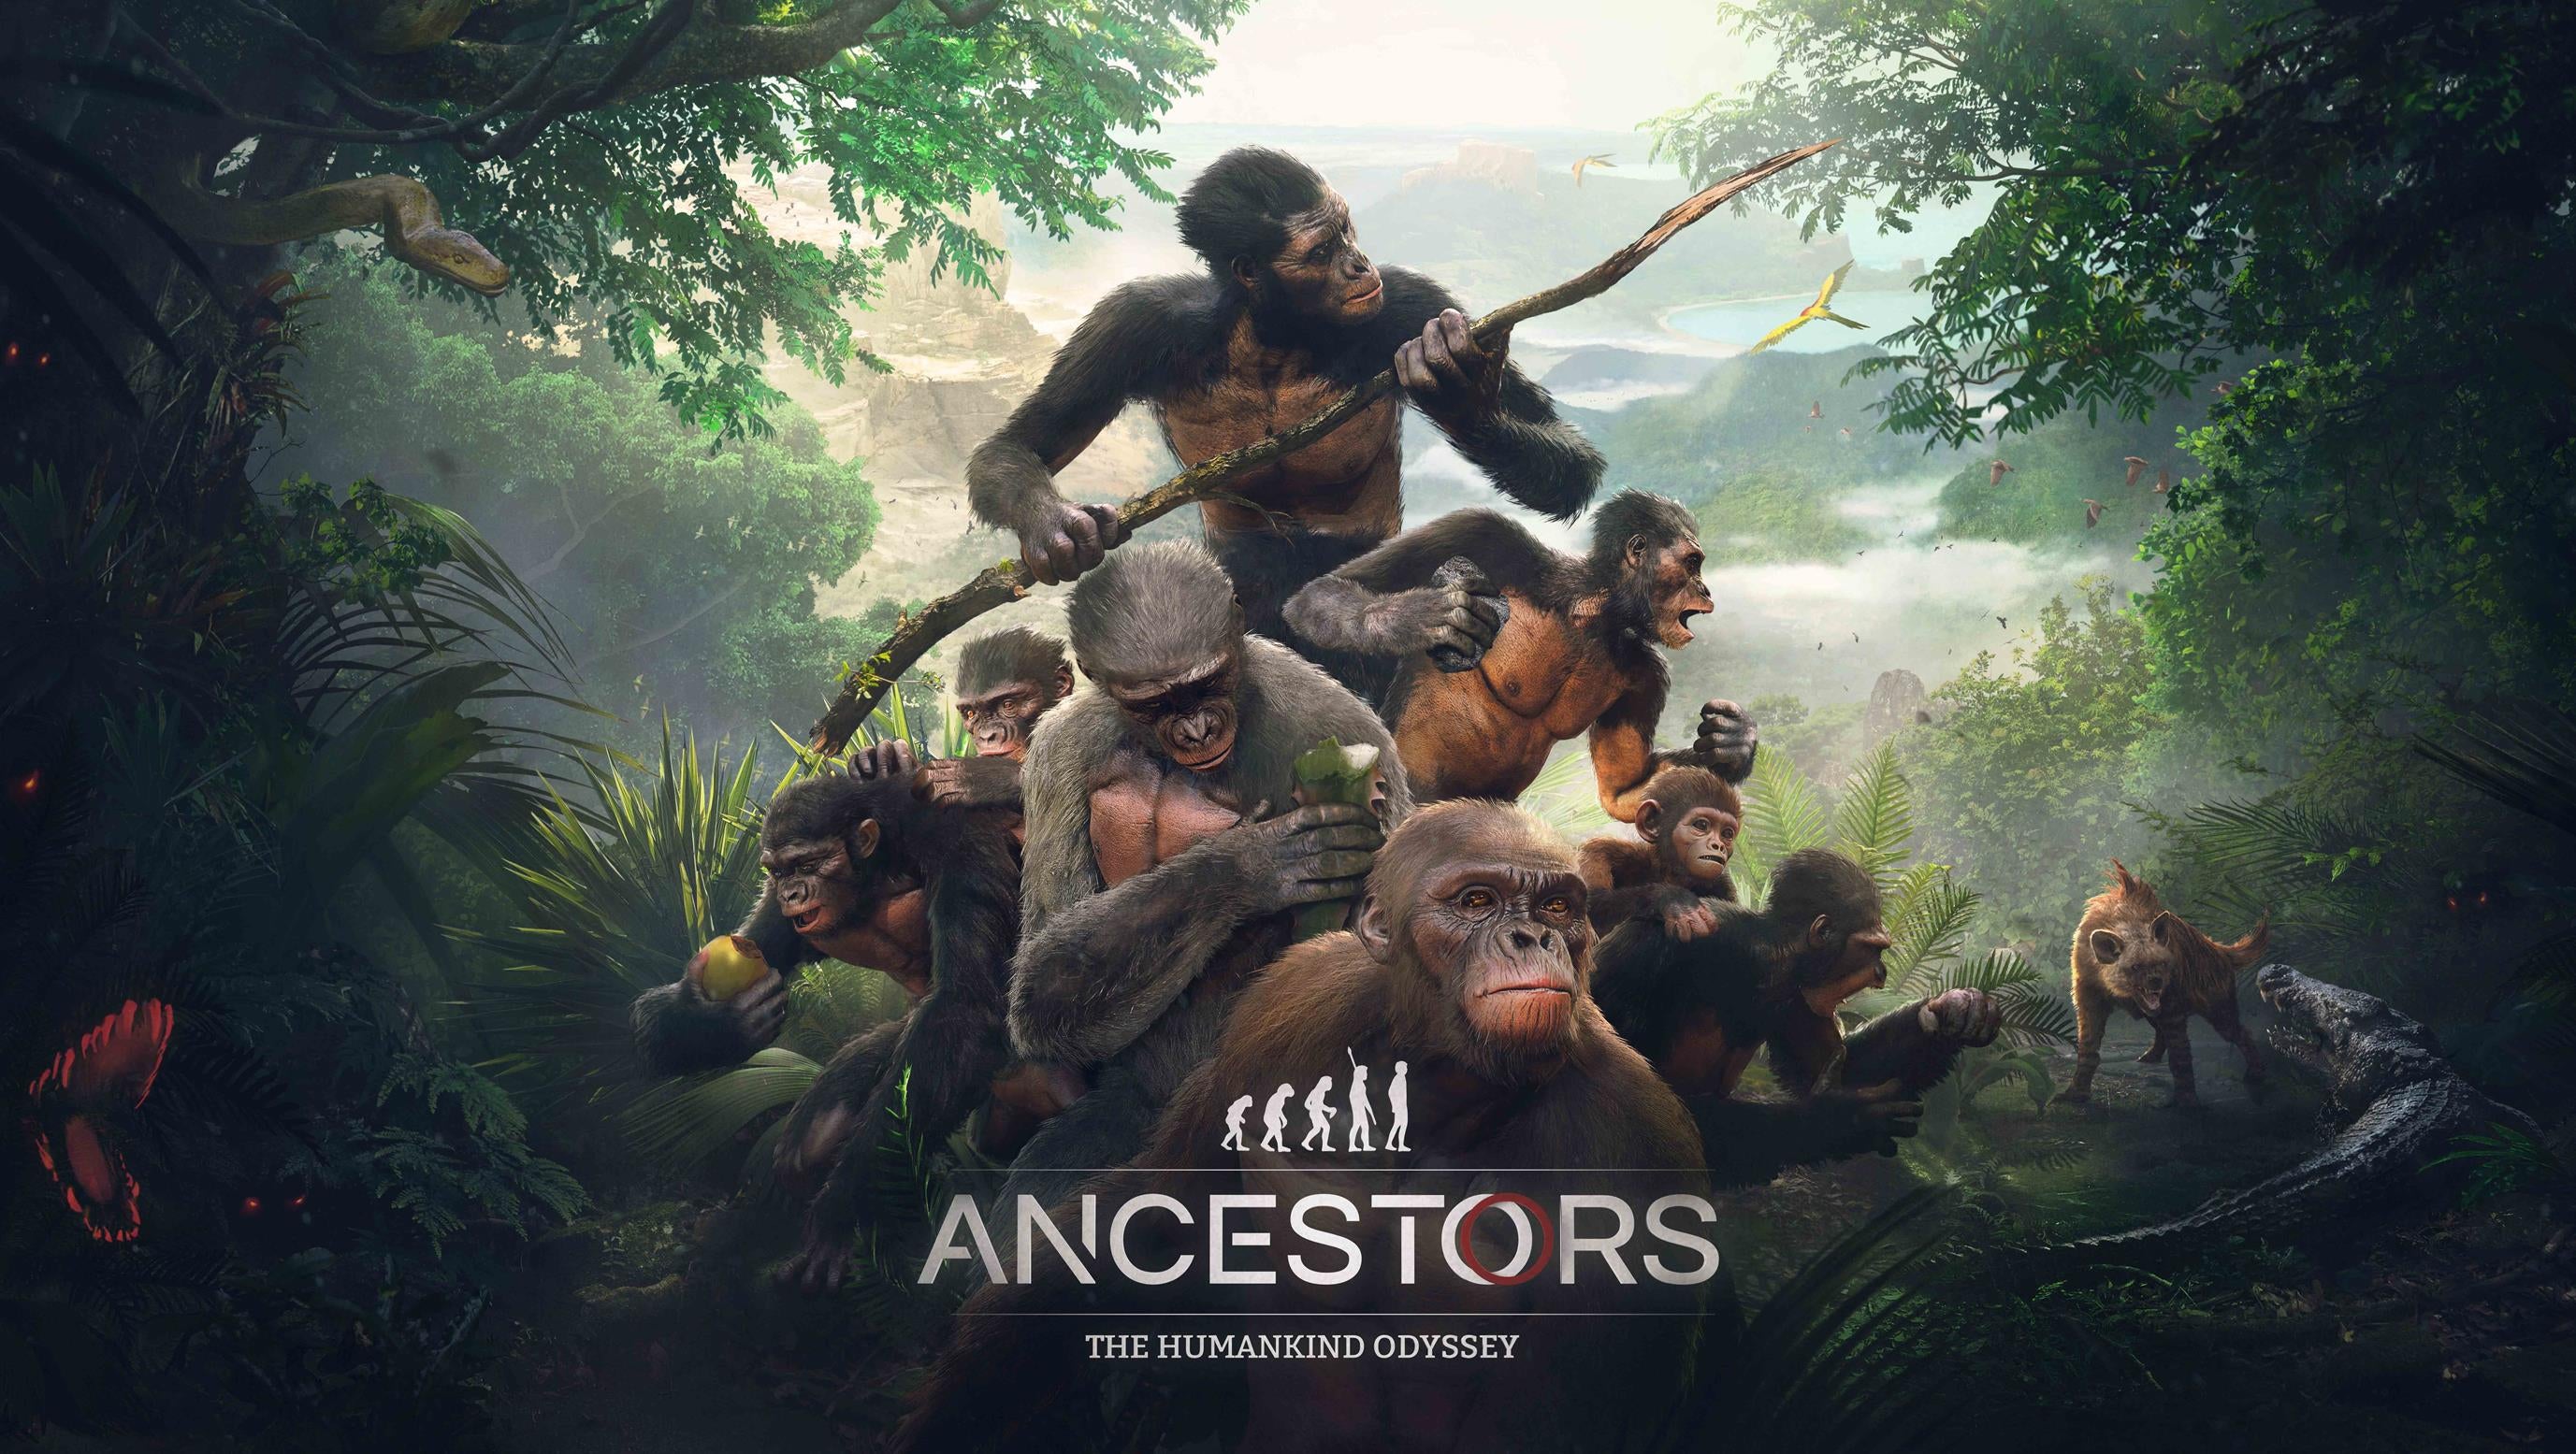 neutral Hobart Manøvre Ancestors: The Humankind Odyssey review - a clumsy poke at evolution | VG247